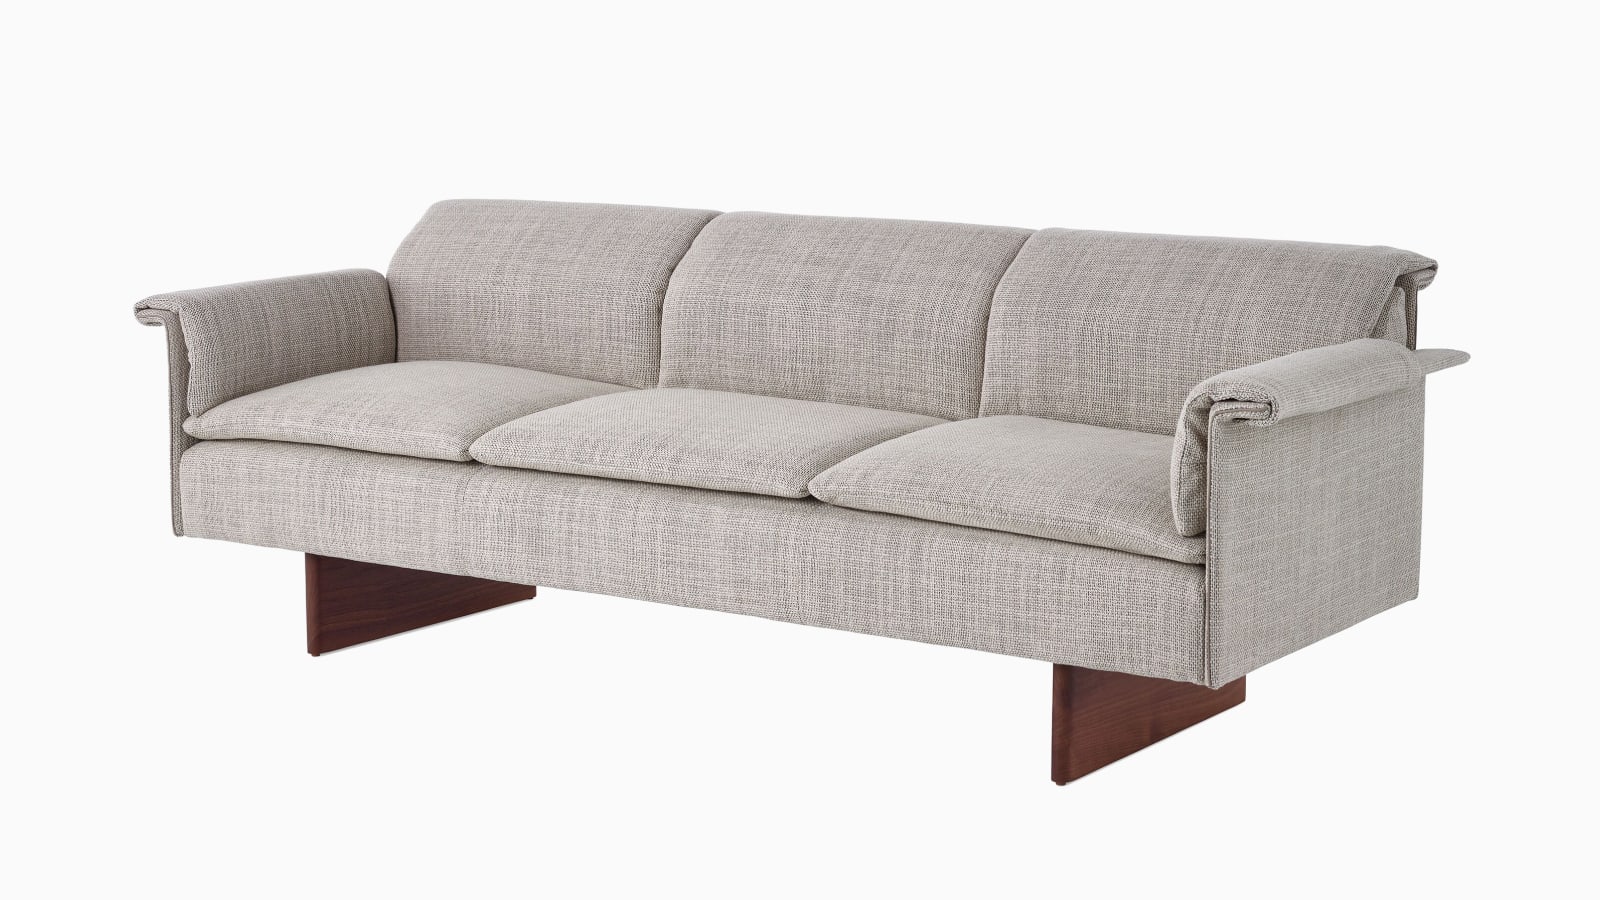 Mantle Three Seater Sofa in Capri Stone with Walnut Wood Base, viewed at an angle.